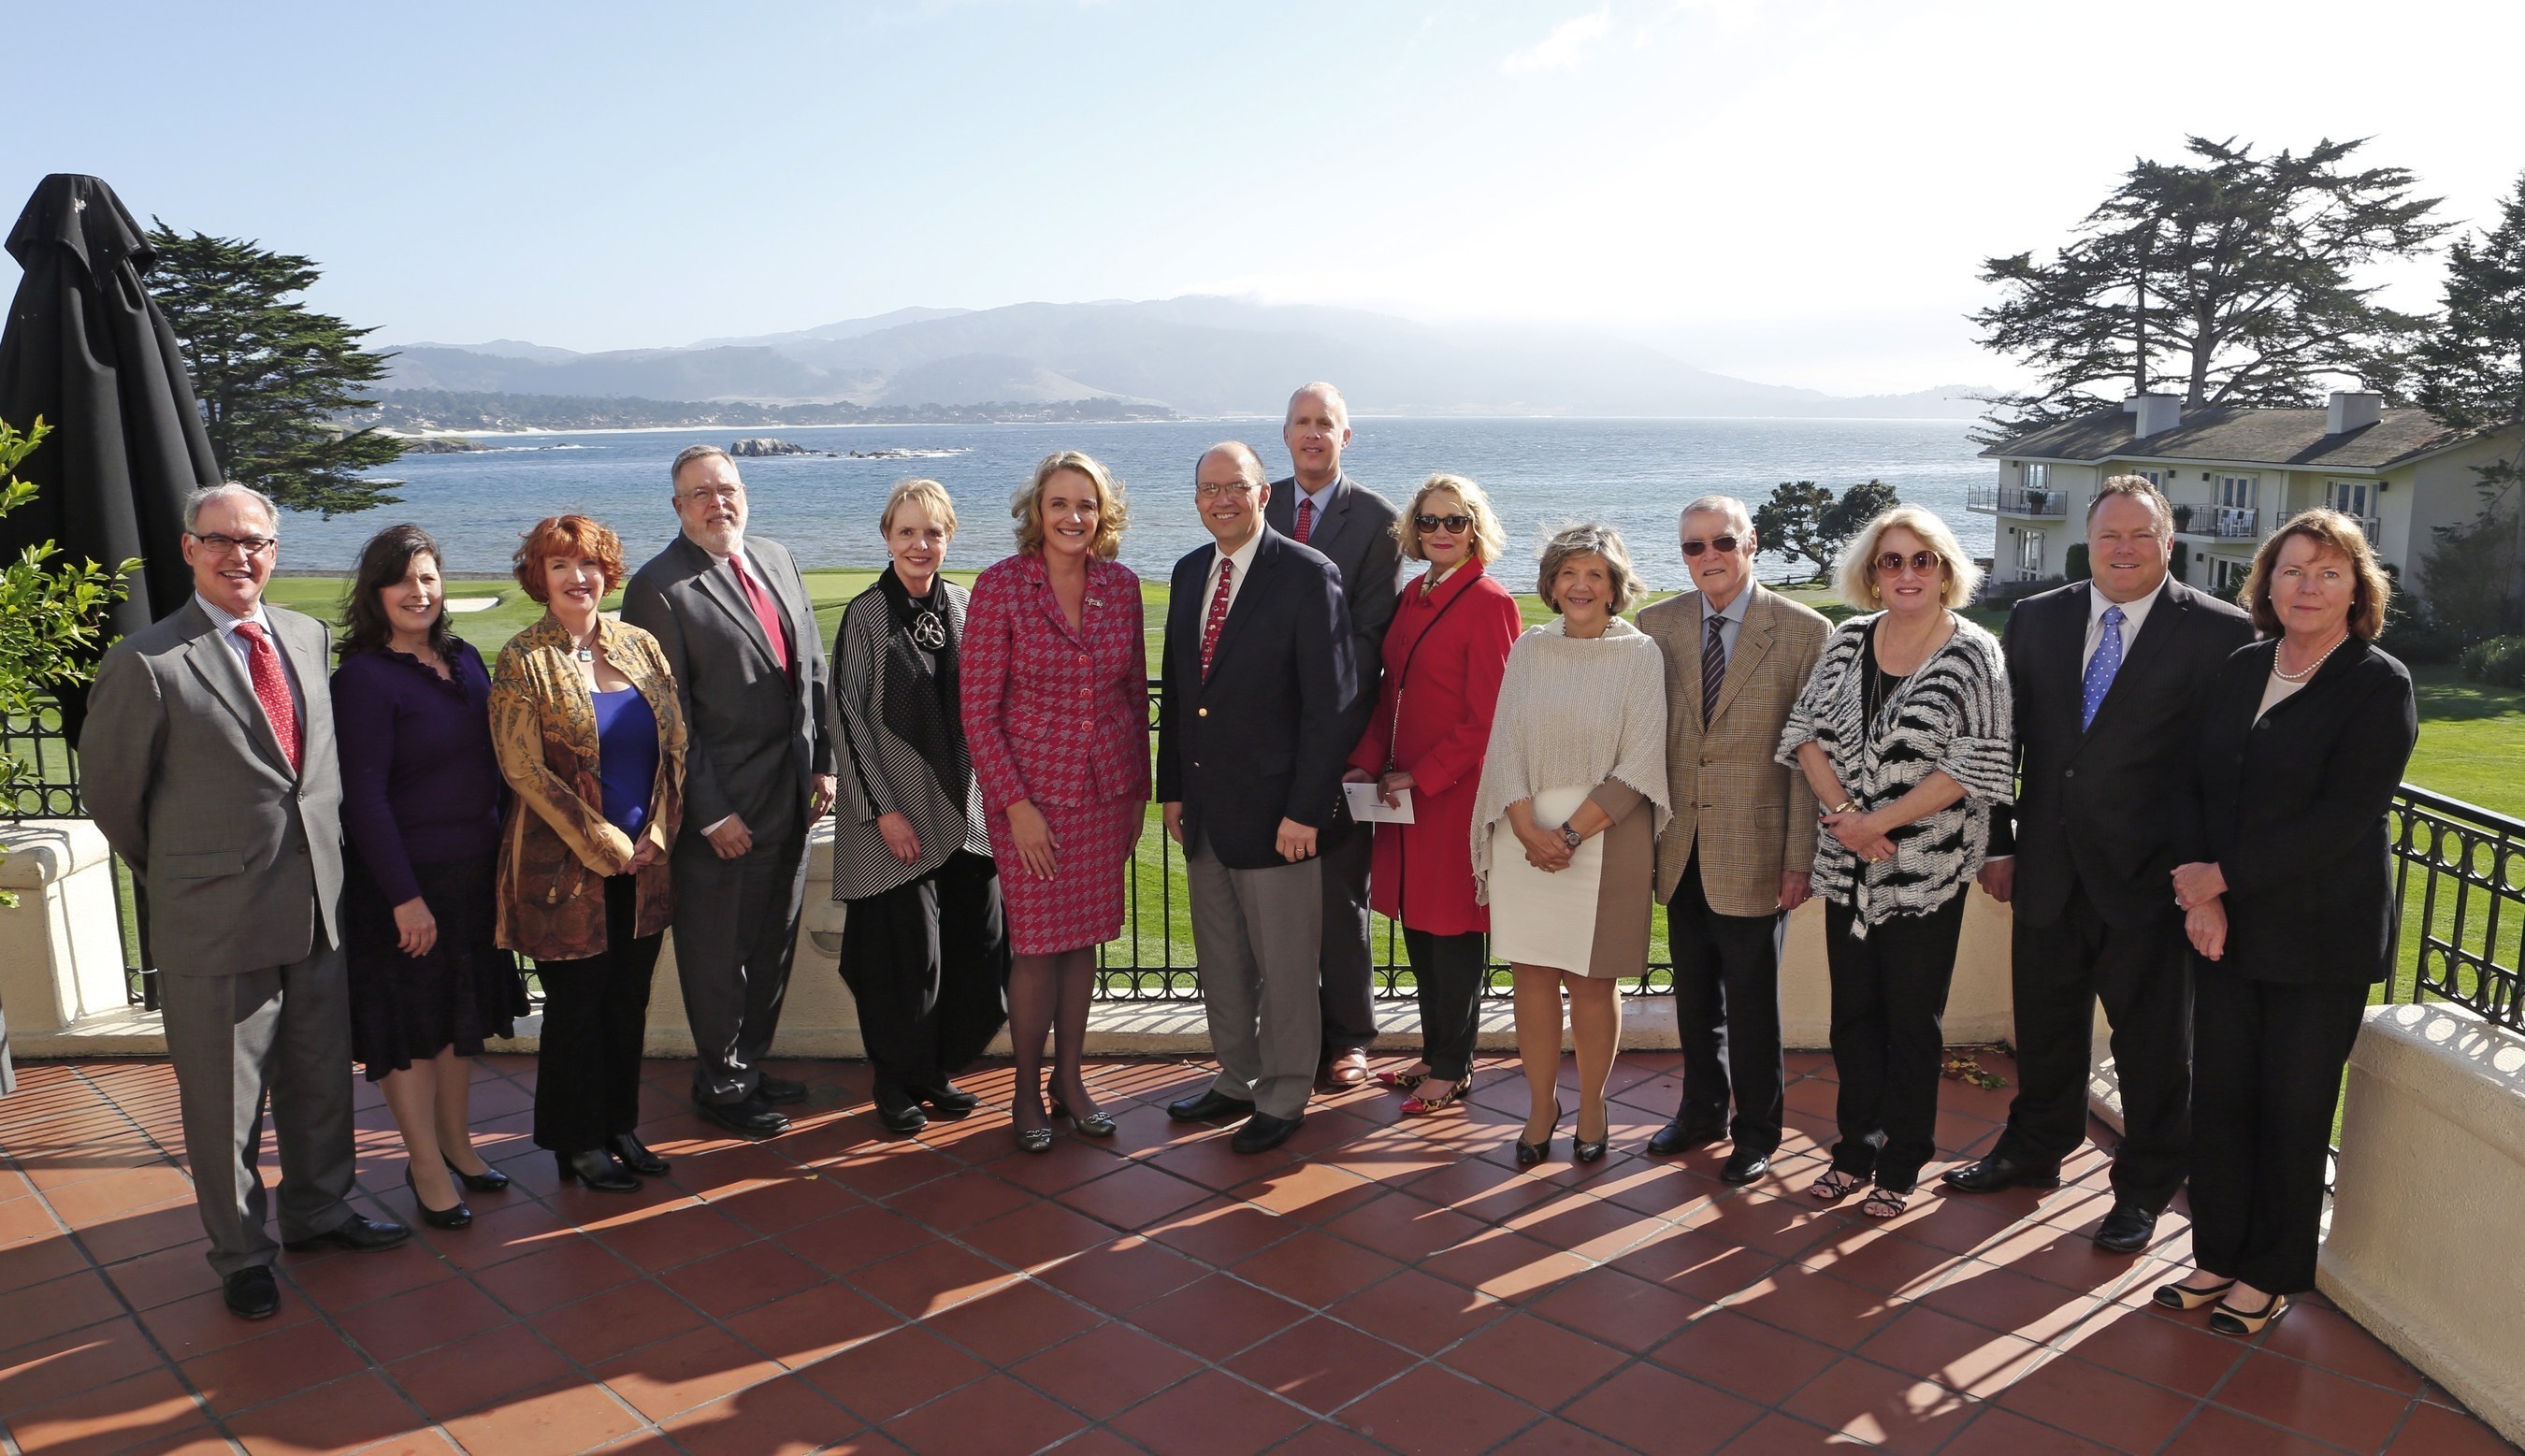 The charitable partners of the 2014 Pebble Beach Concours d'Elegance attended a charity luncheon, held Monday at The Lodge at Pebble Beach. Concours charities received a total of $1.9 million this year to help people in need. [credit: Christine Bush / Pebble Beach Company]